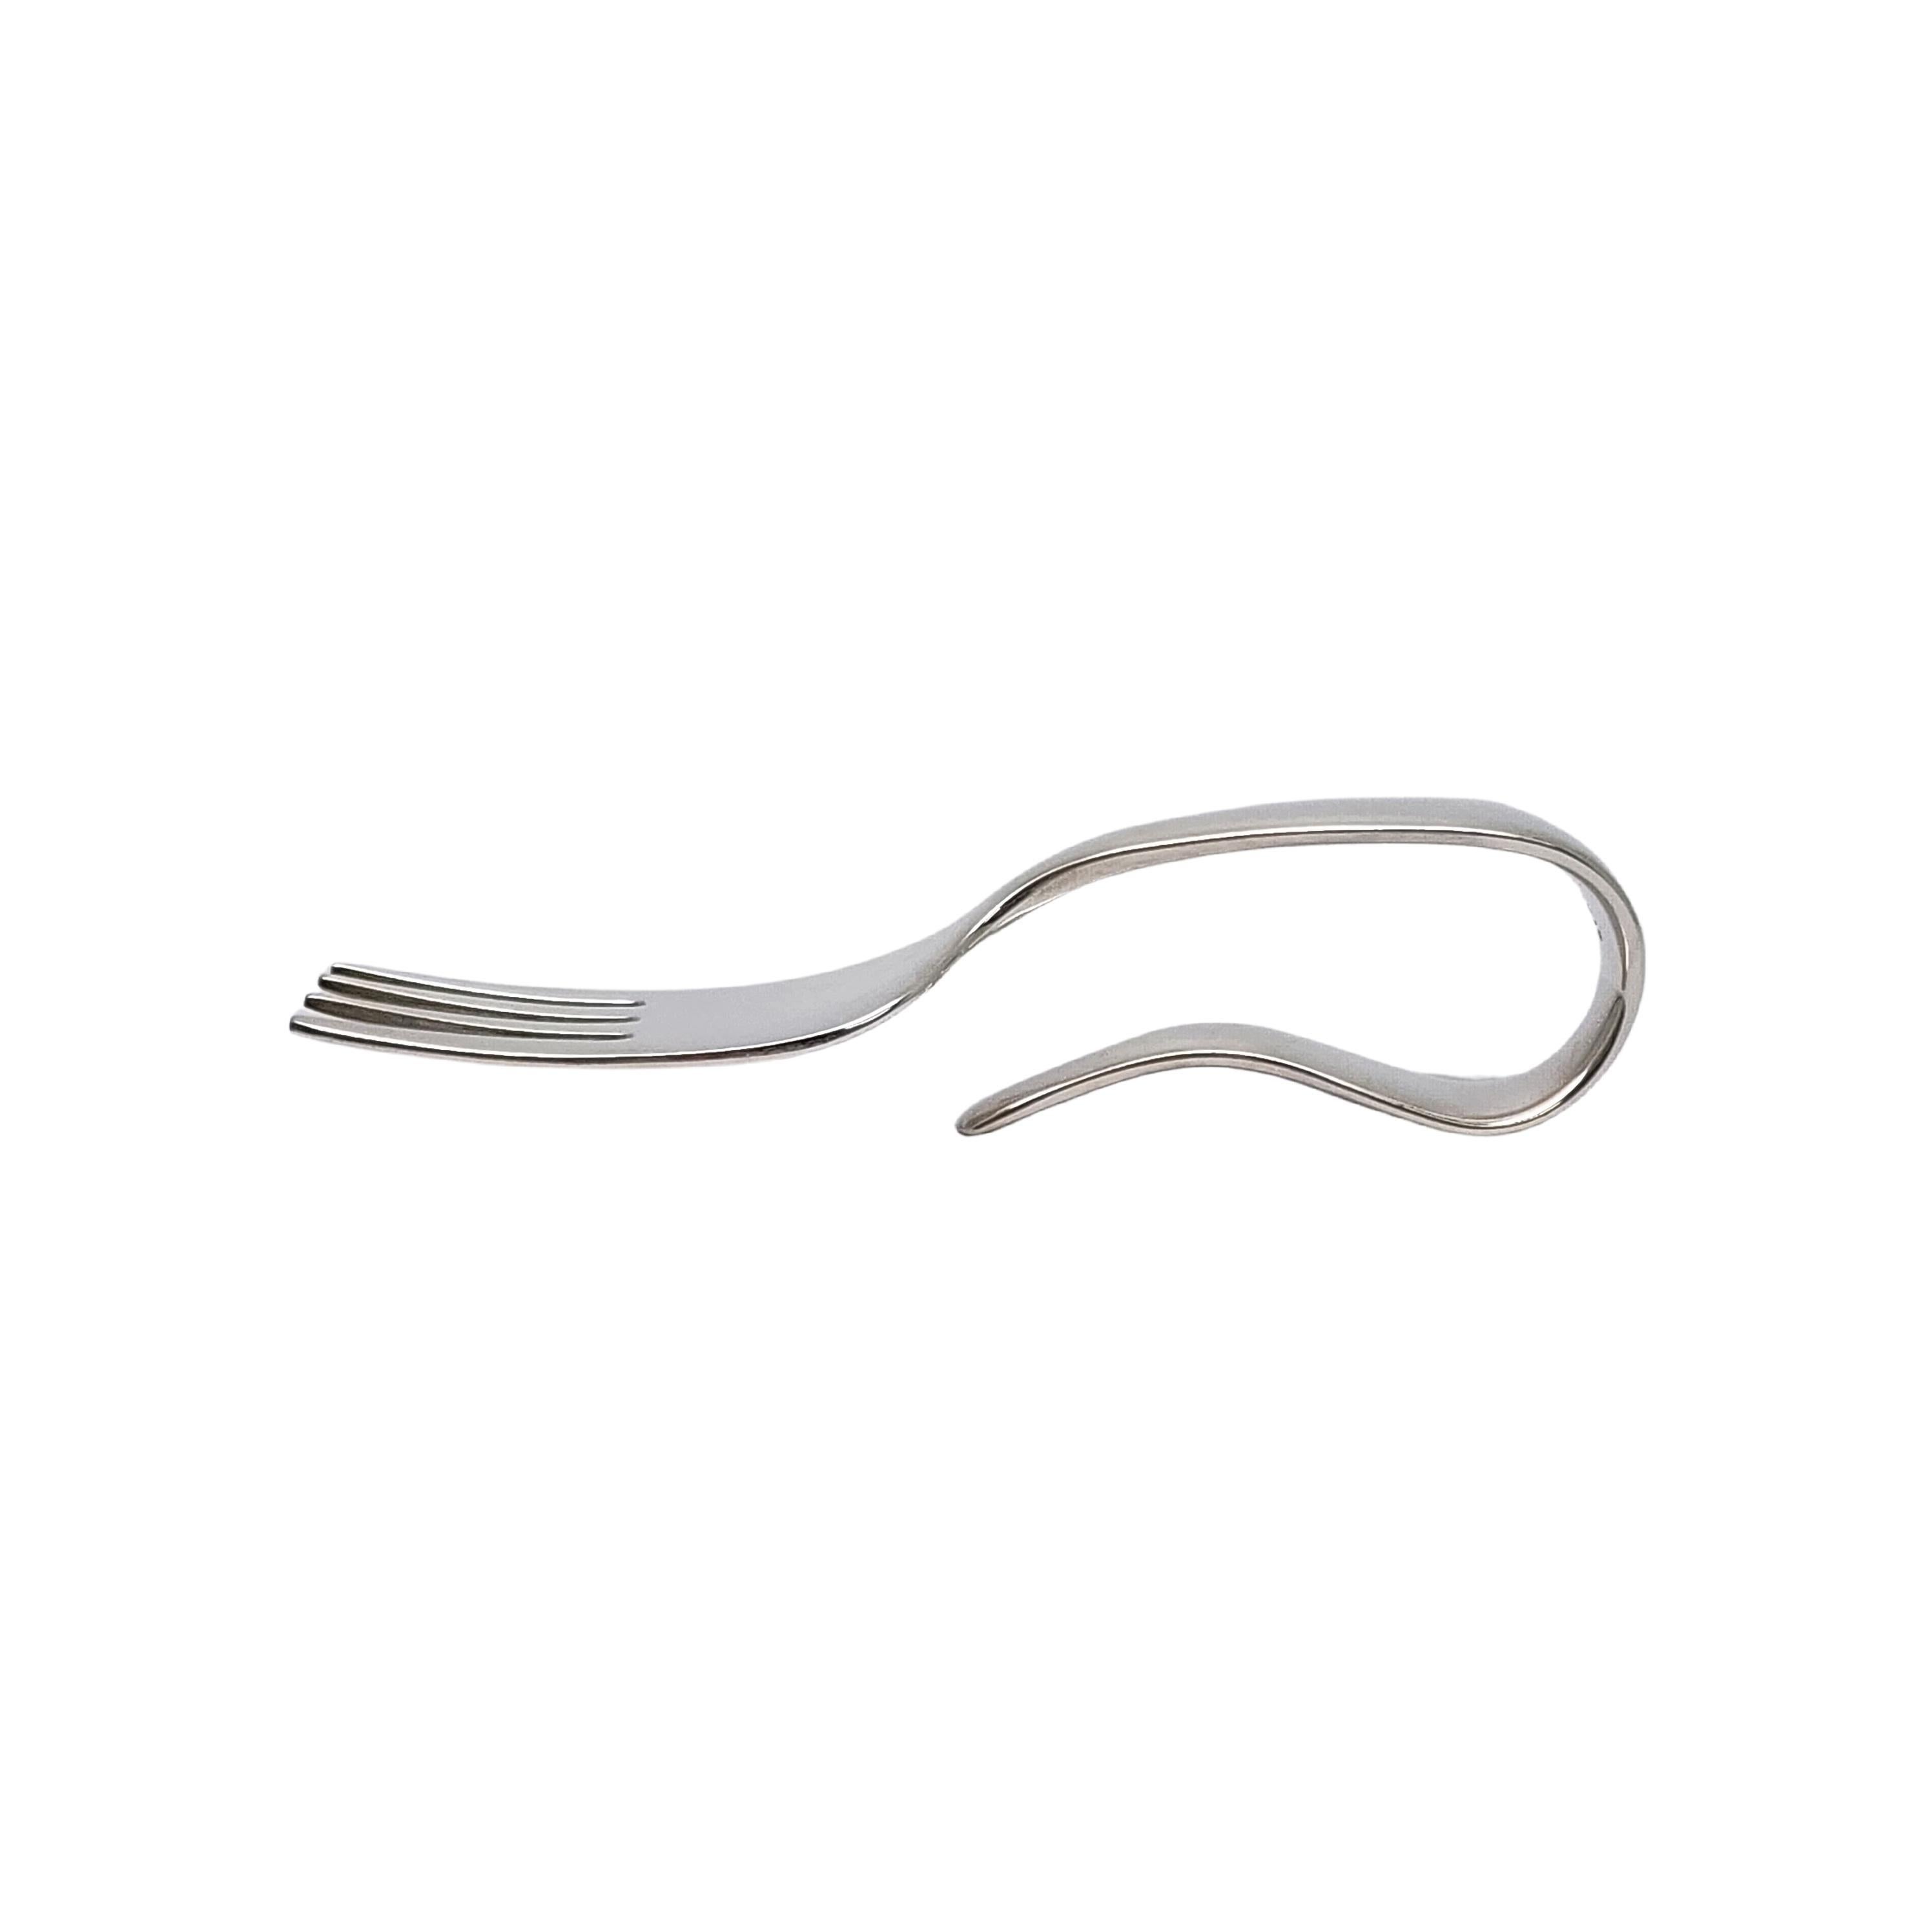 Tiffany & Co Sterling Silver Curved Loop Handle Baby Fork #17261 For Sale 2